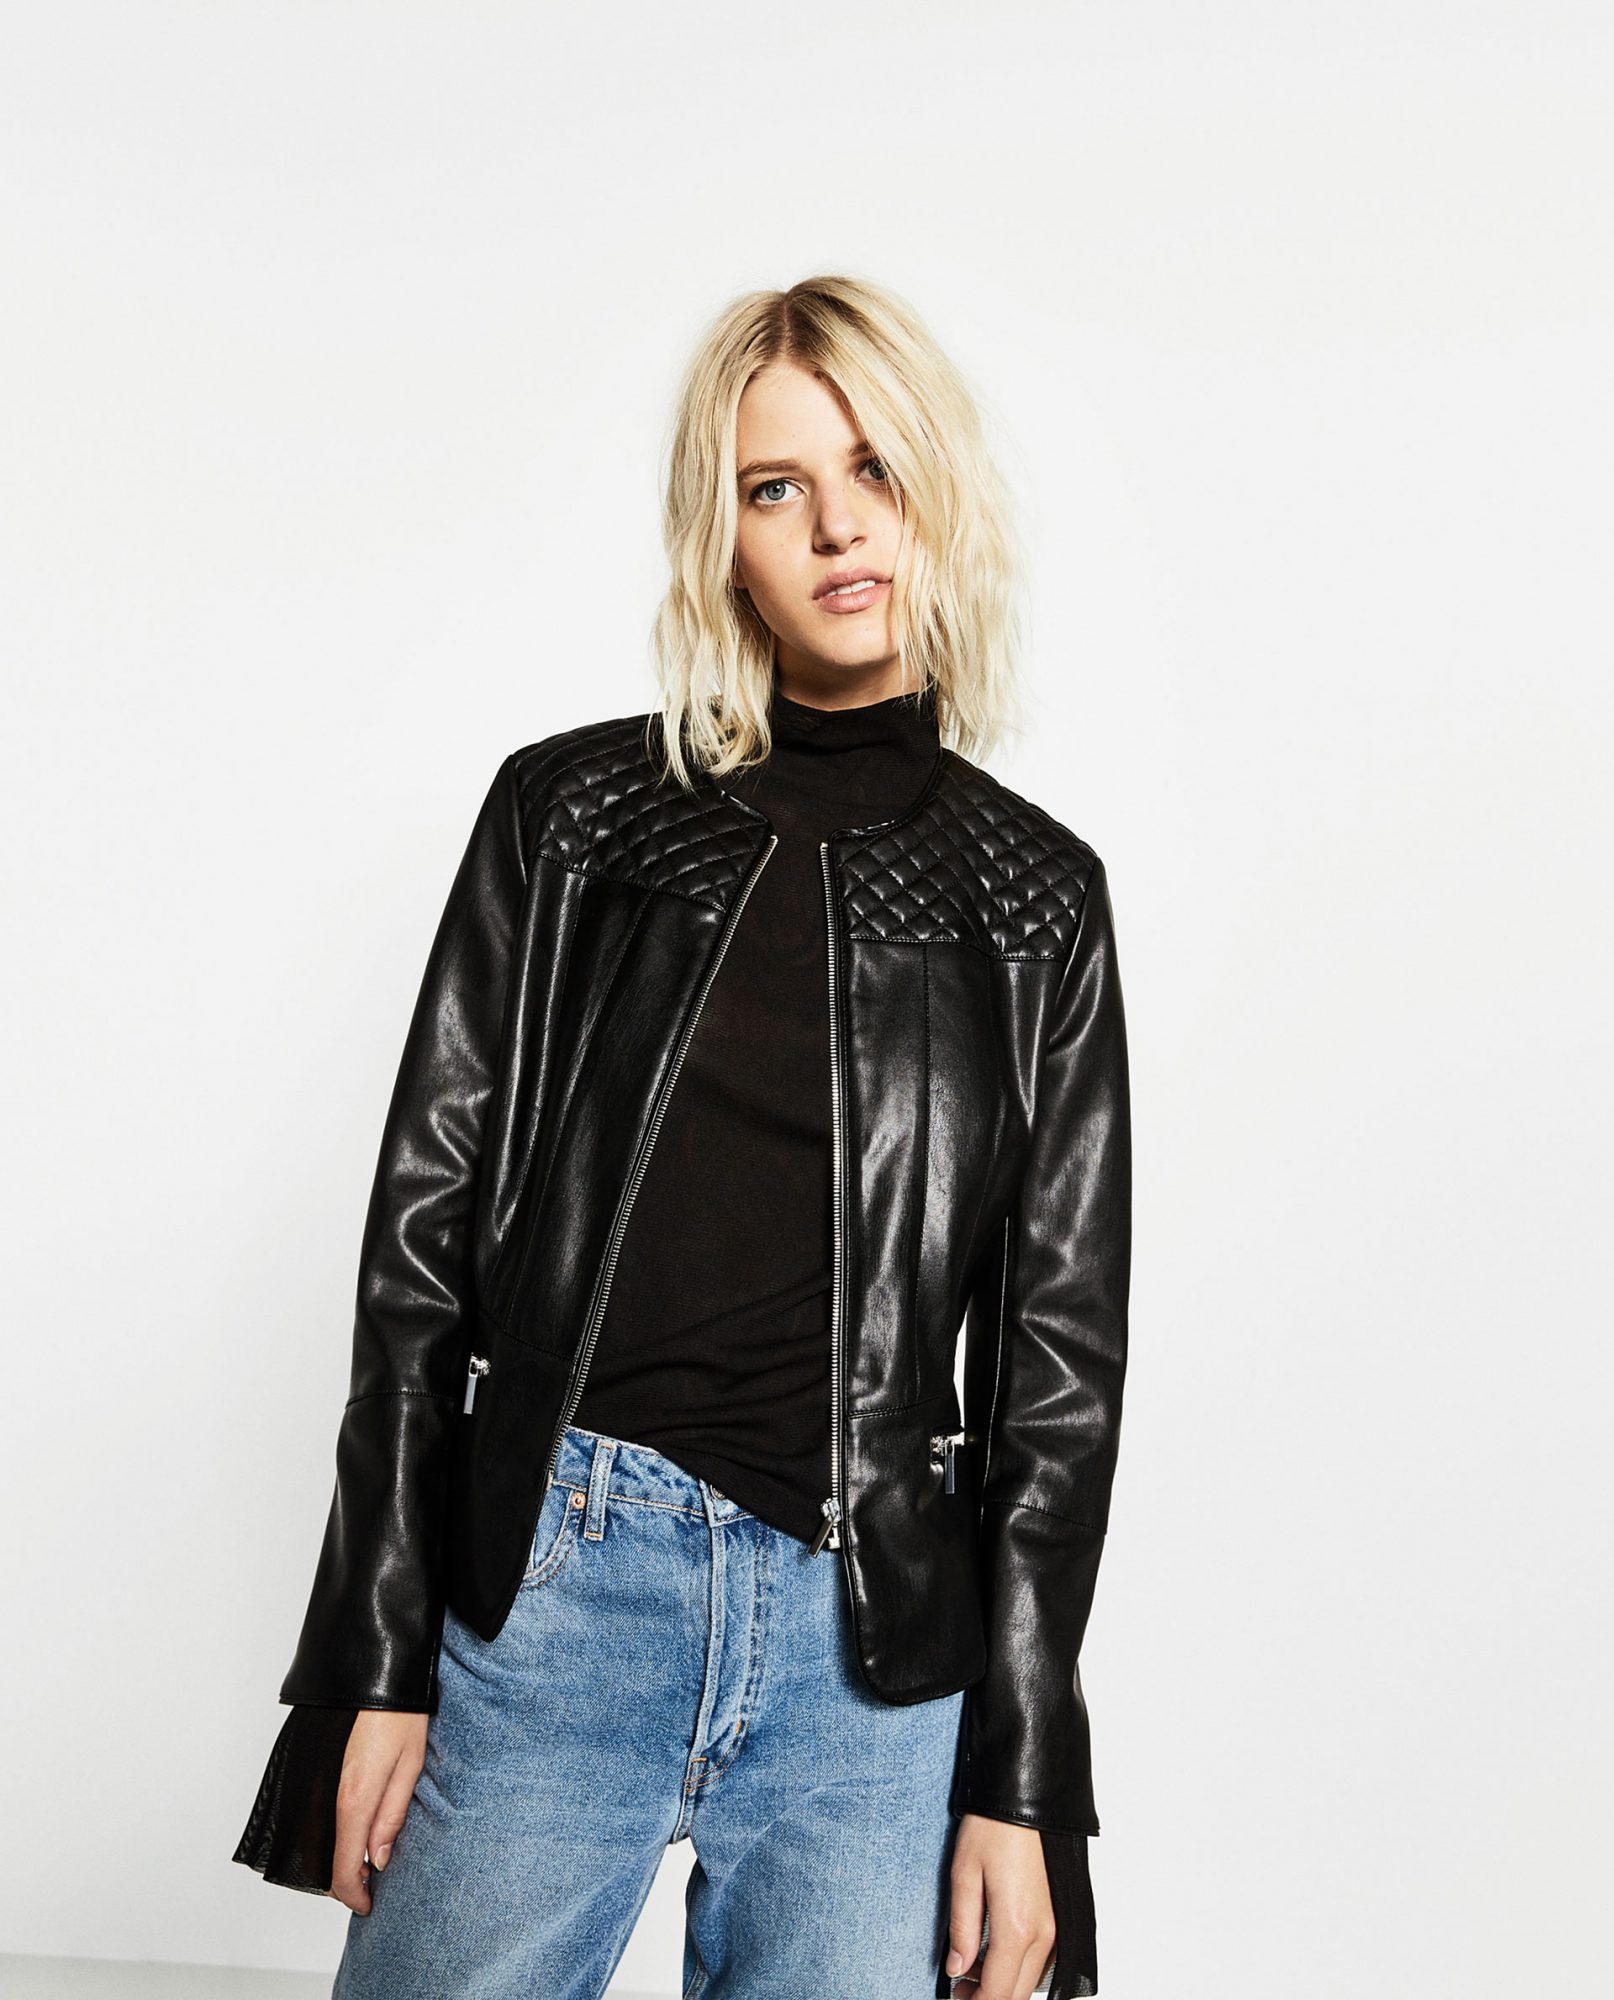 Zara's website has a secret sale section, and BRB gonna go spend all ...